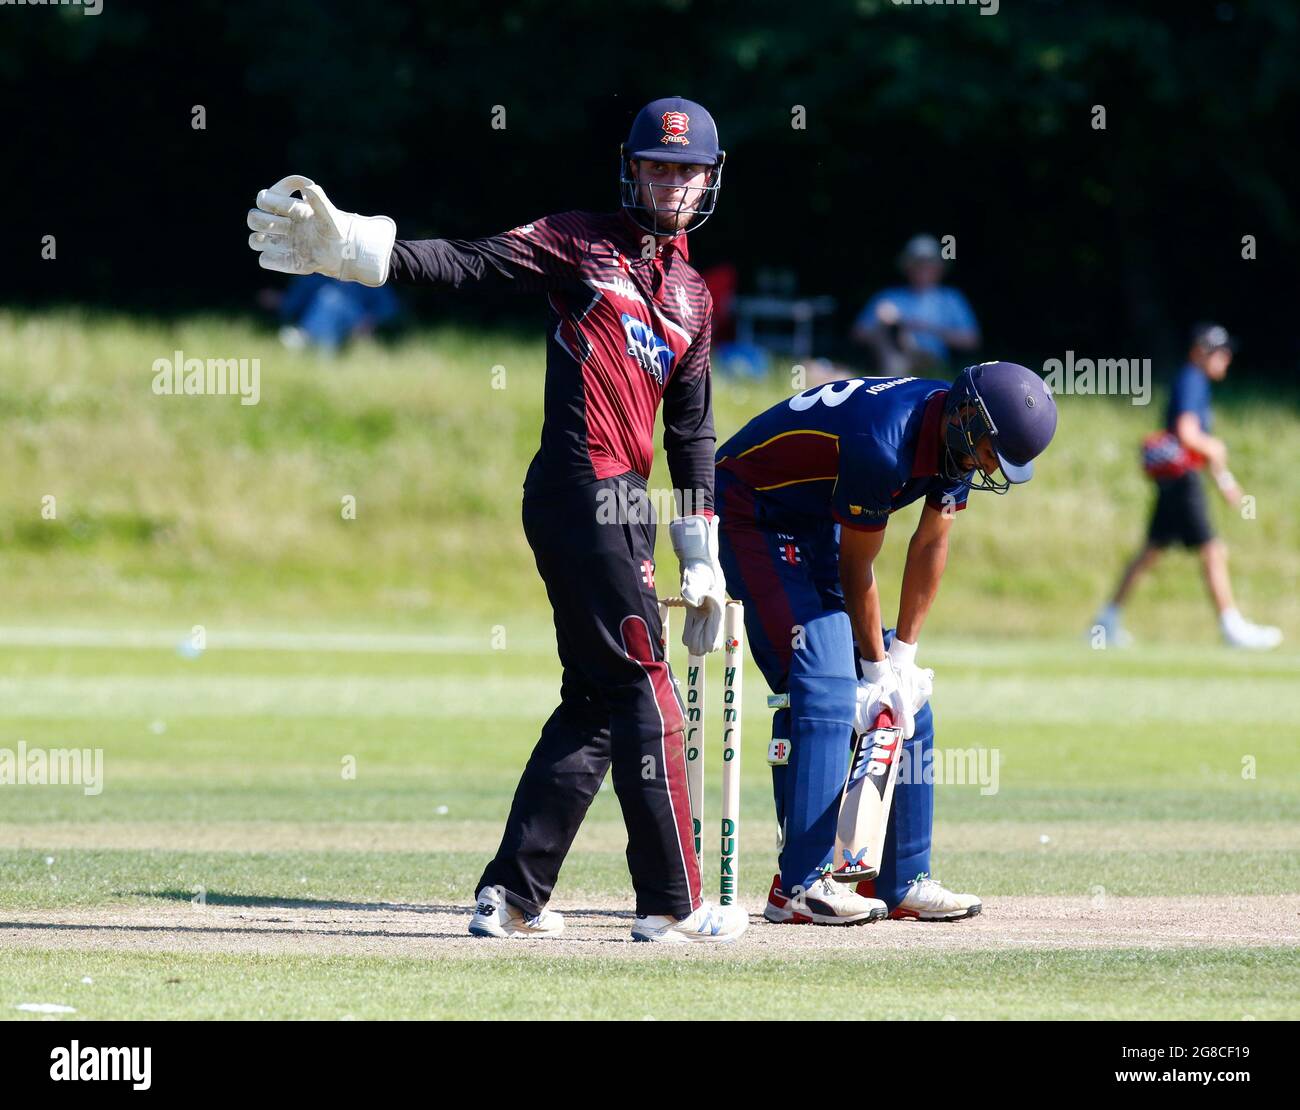 BILLERICAY, United Kingdom, JULY 18:William Butlemen of Brentwood cc during    Dukes Essex T20 Competition - Final between Wanstead and Snaresbrook CC Stock Photo